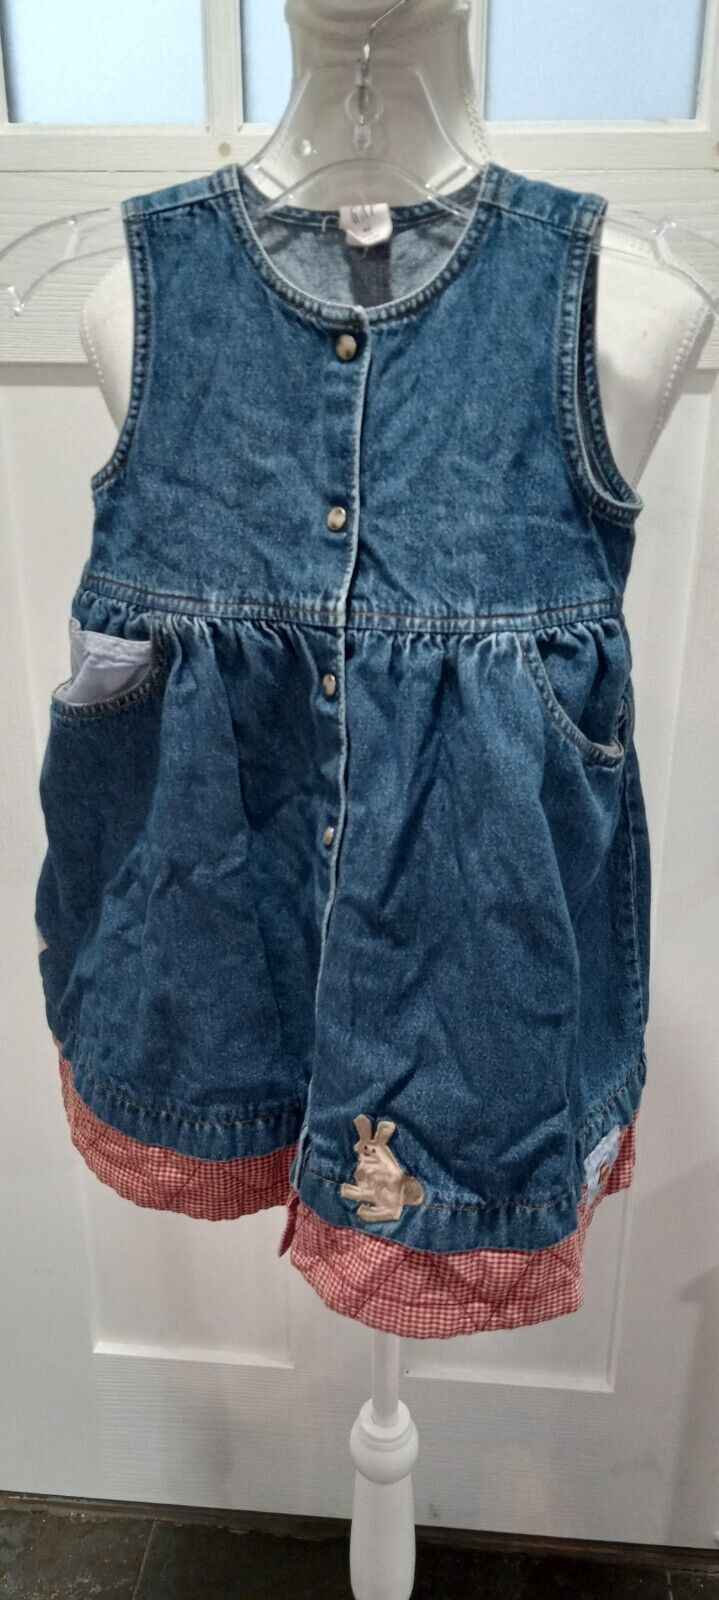 Primary image for Gap Girls Easter Jean Dress Size 4